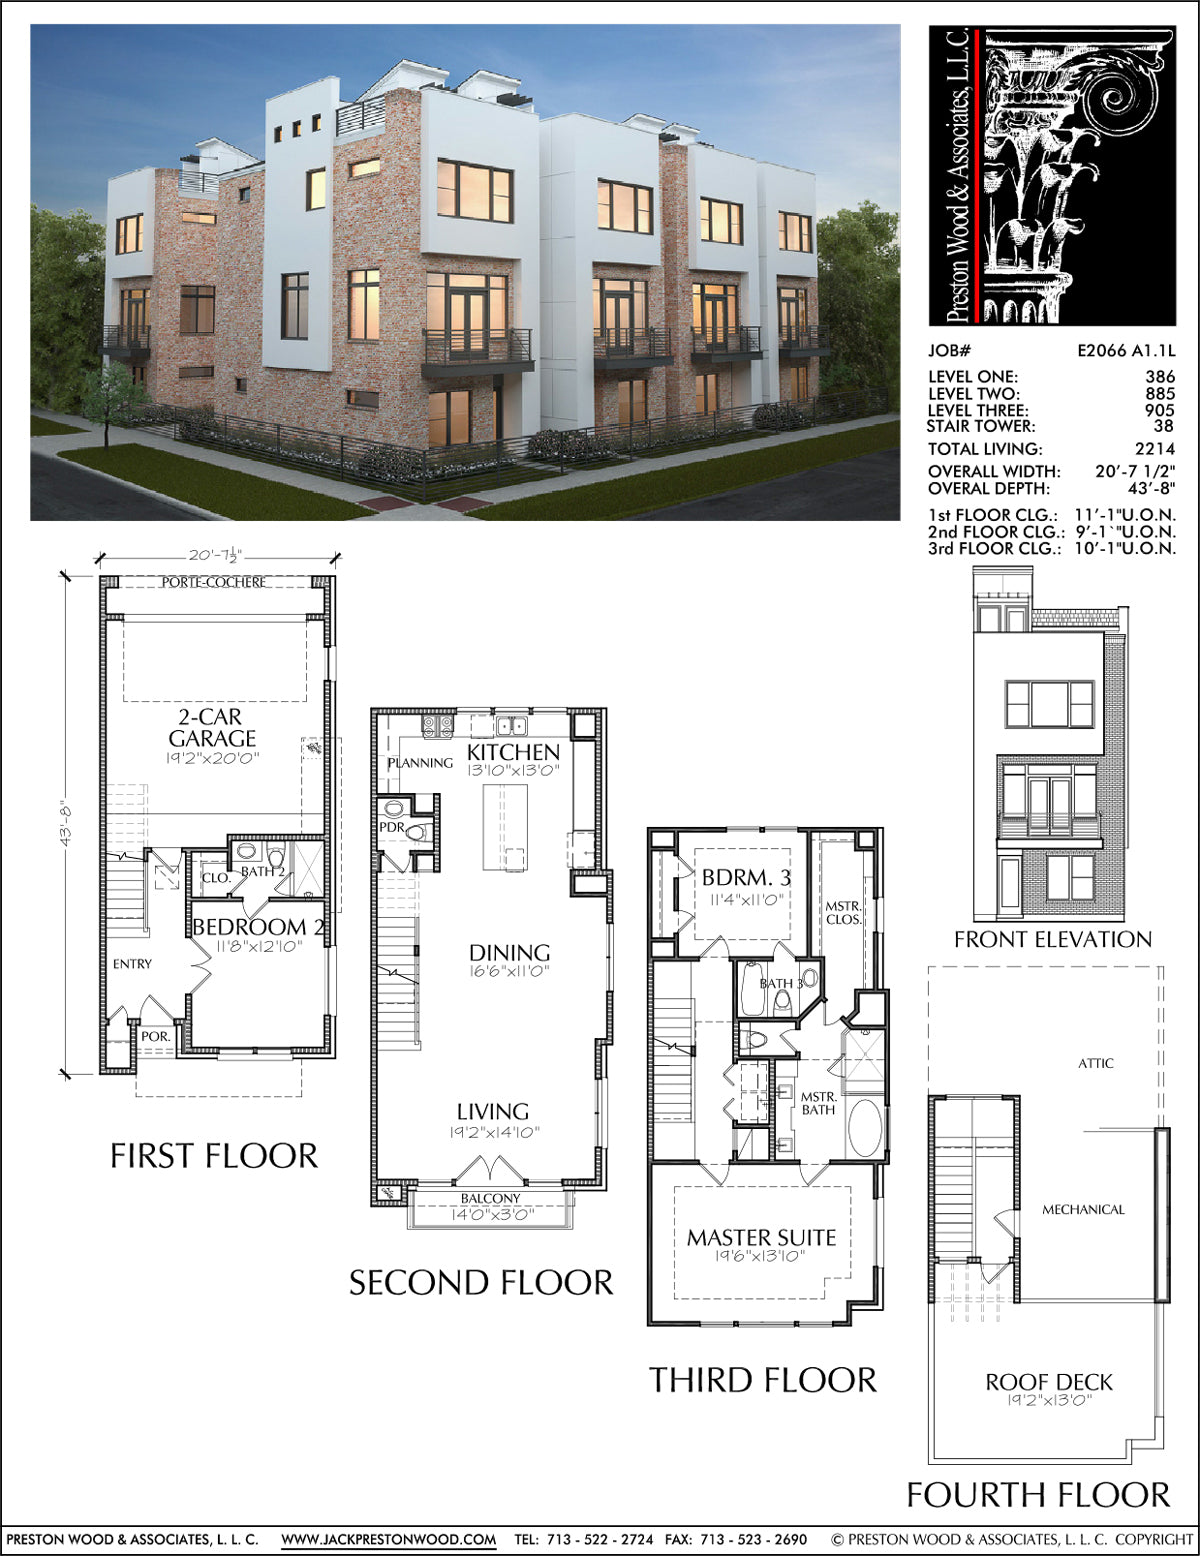 Modern Townhouse Design, Brick Row House, New Town Home